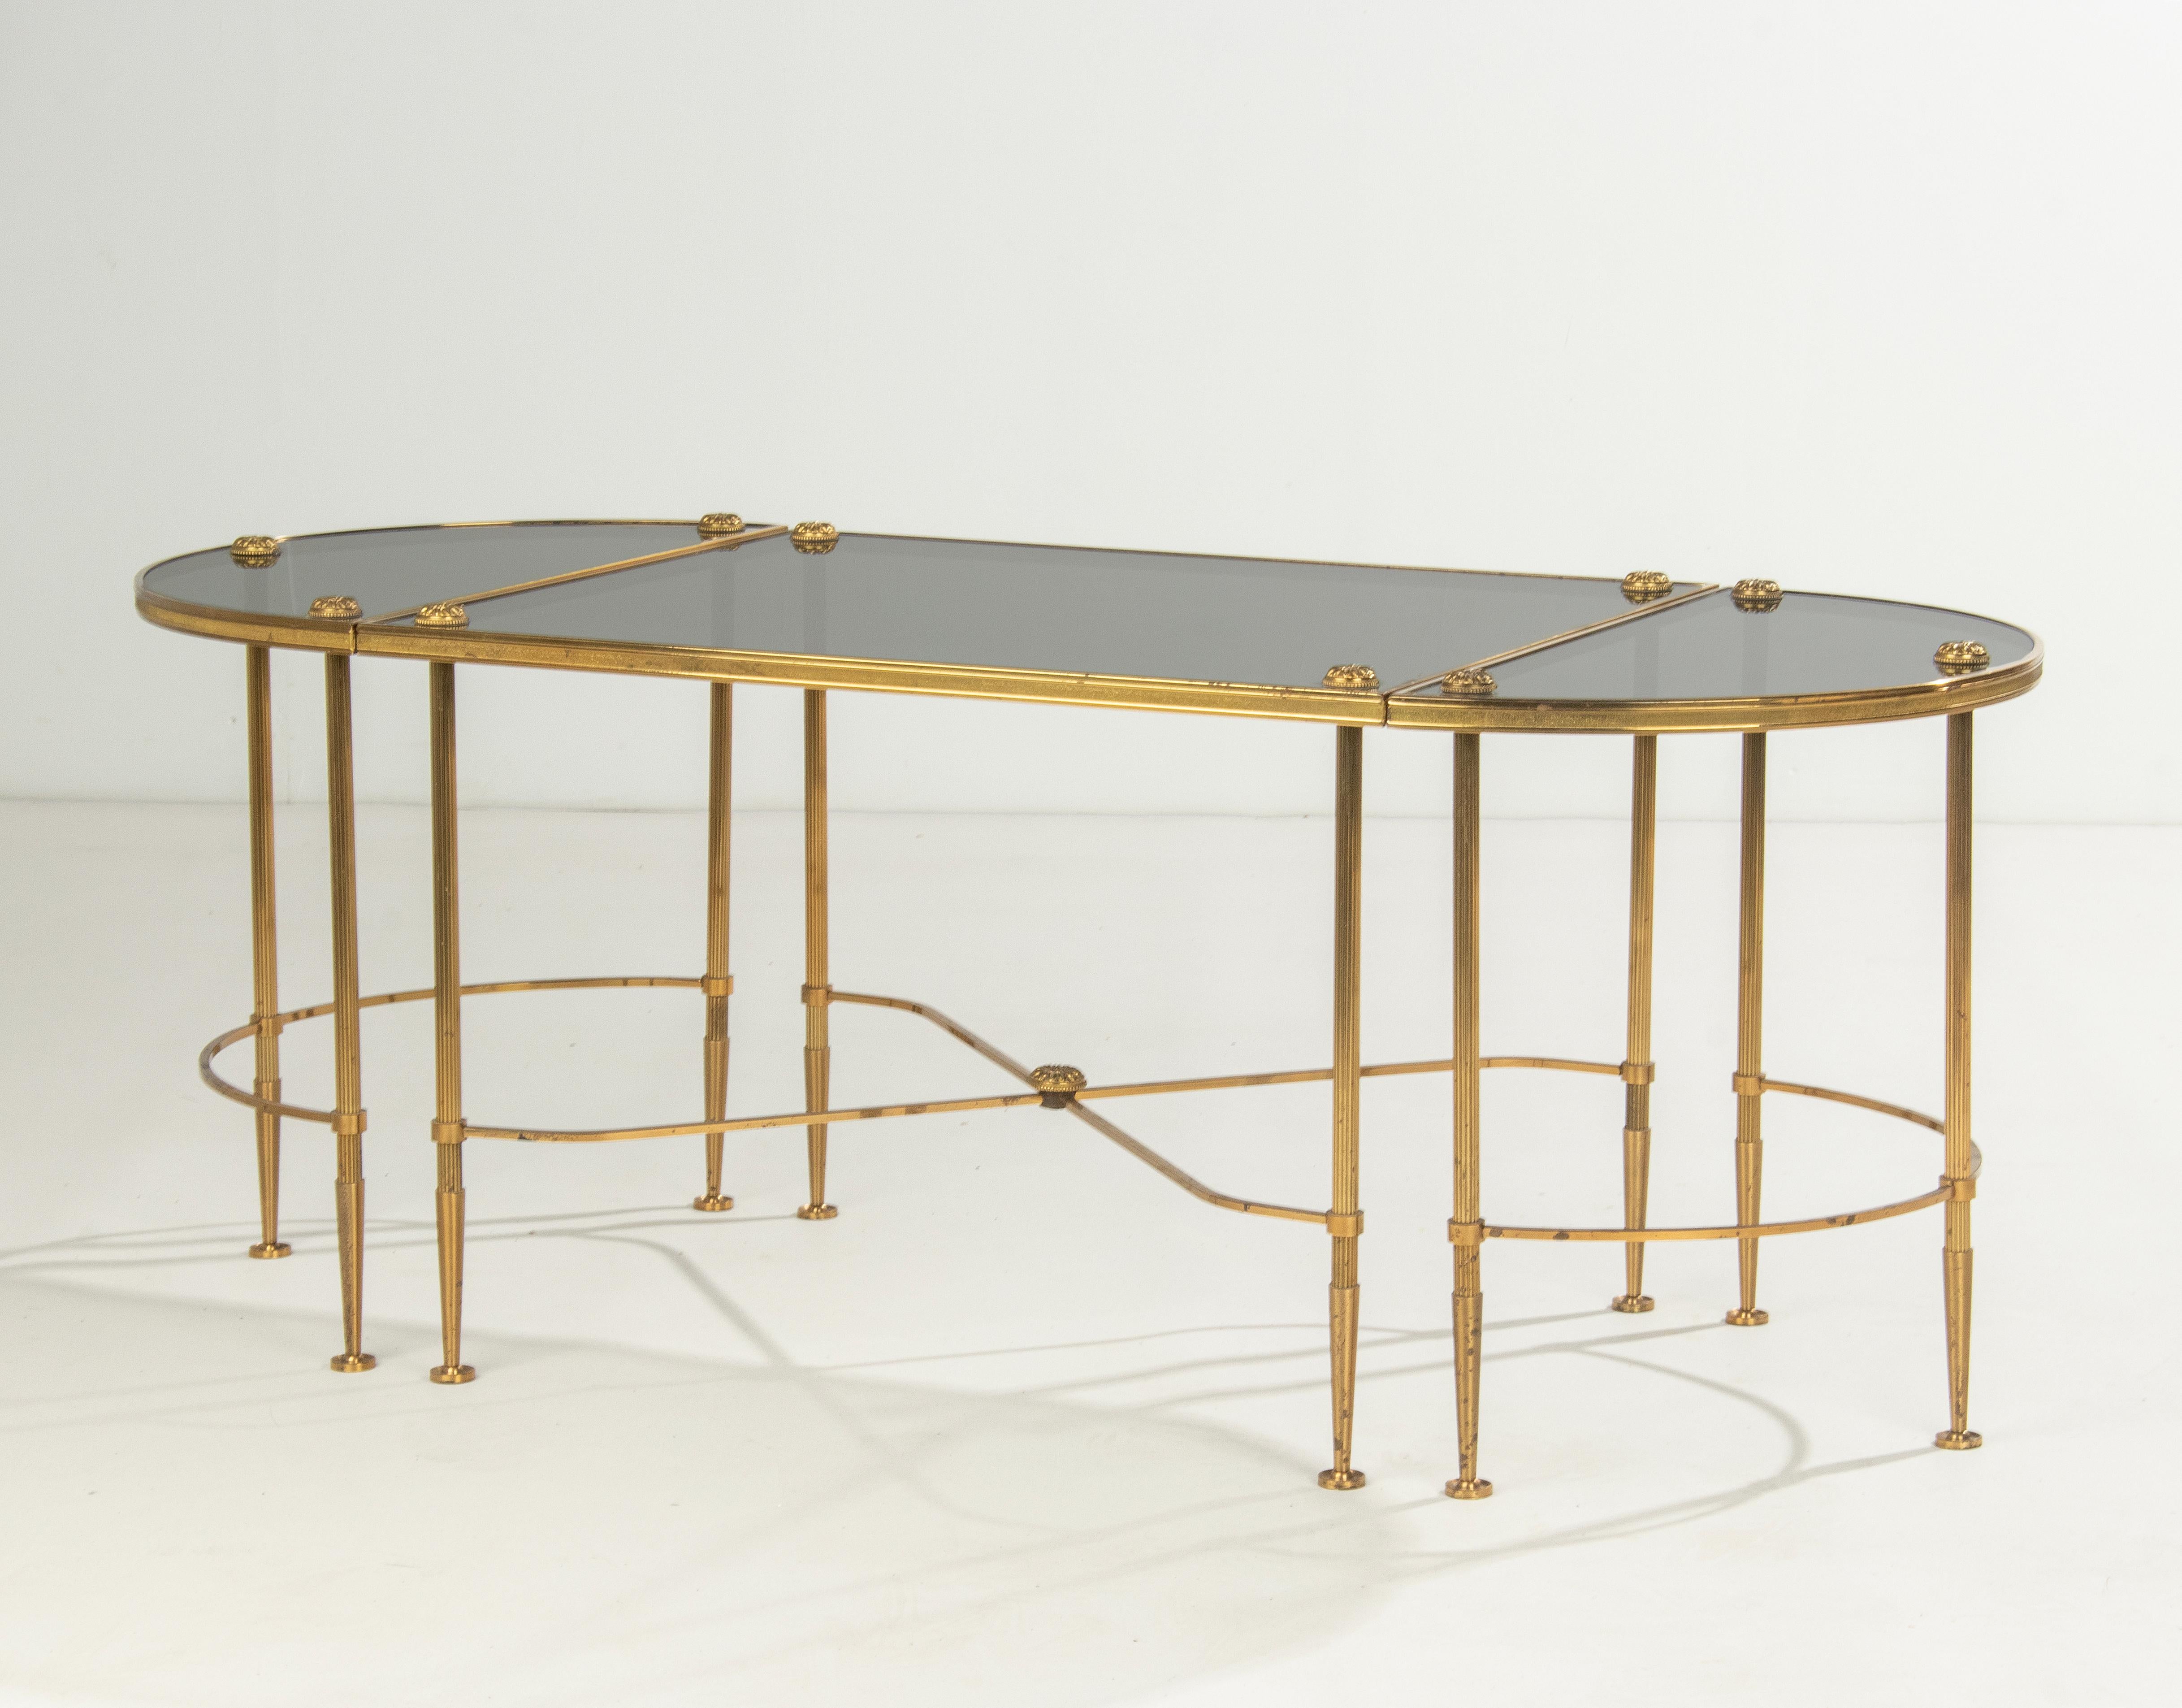 Hollywood Regency Mid-20th Century Brass Demilune Coffee Table Maison Bagues Style For Sale